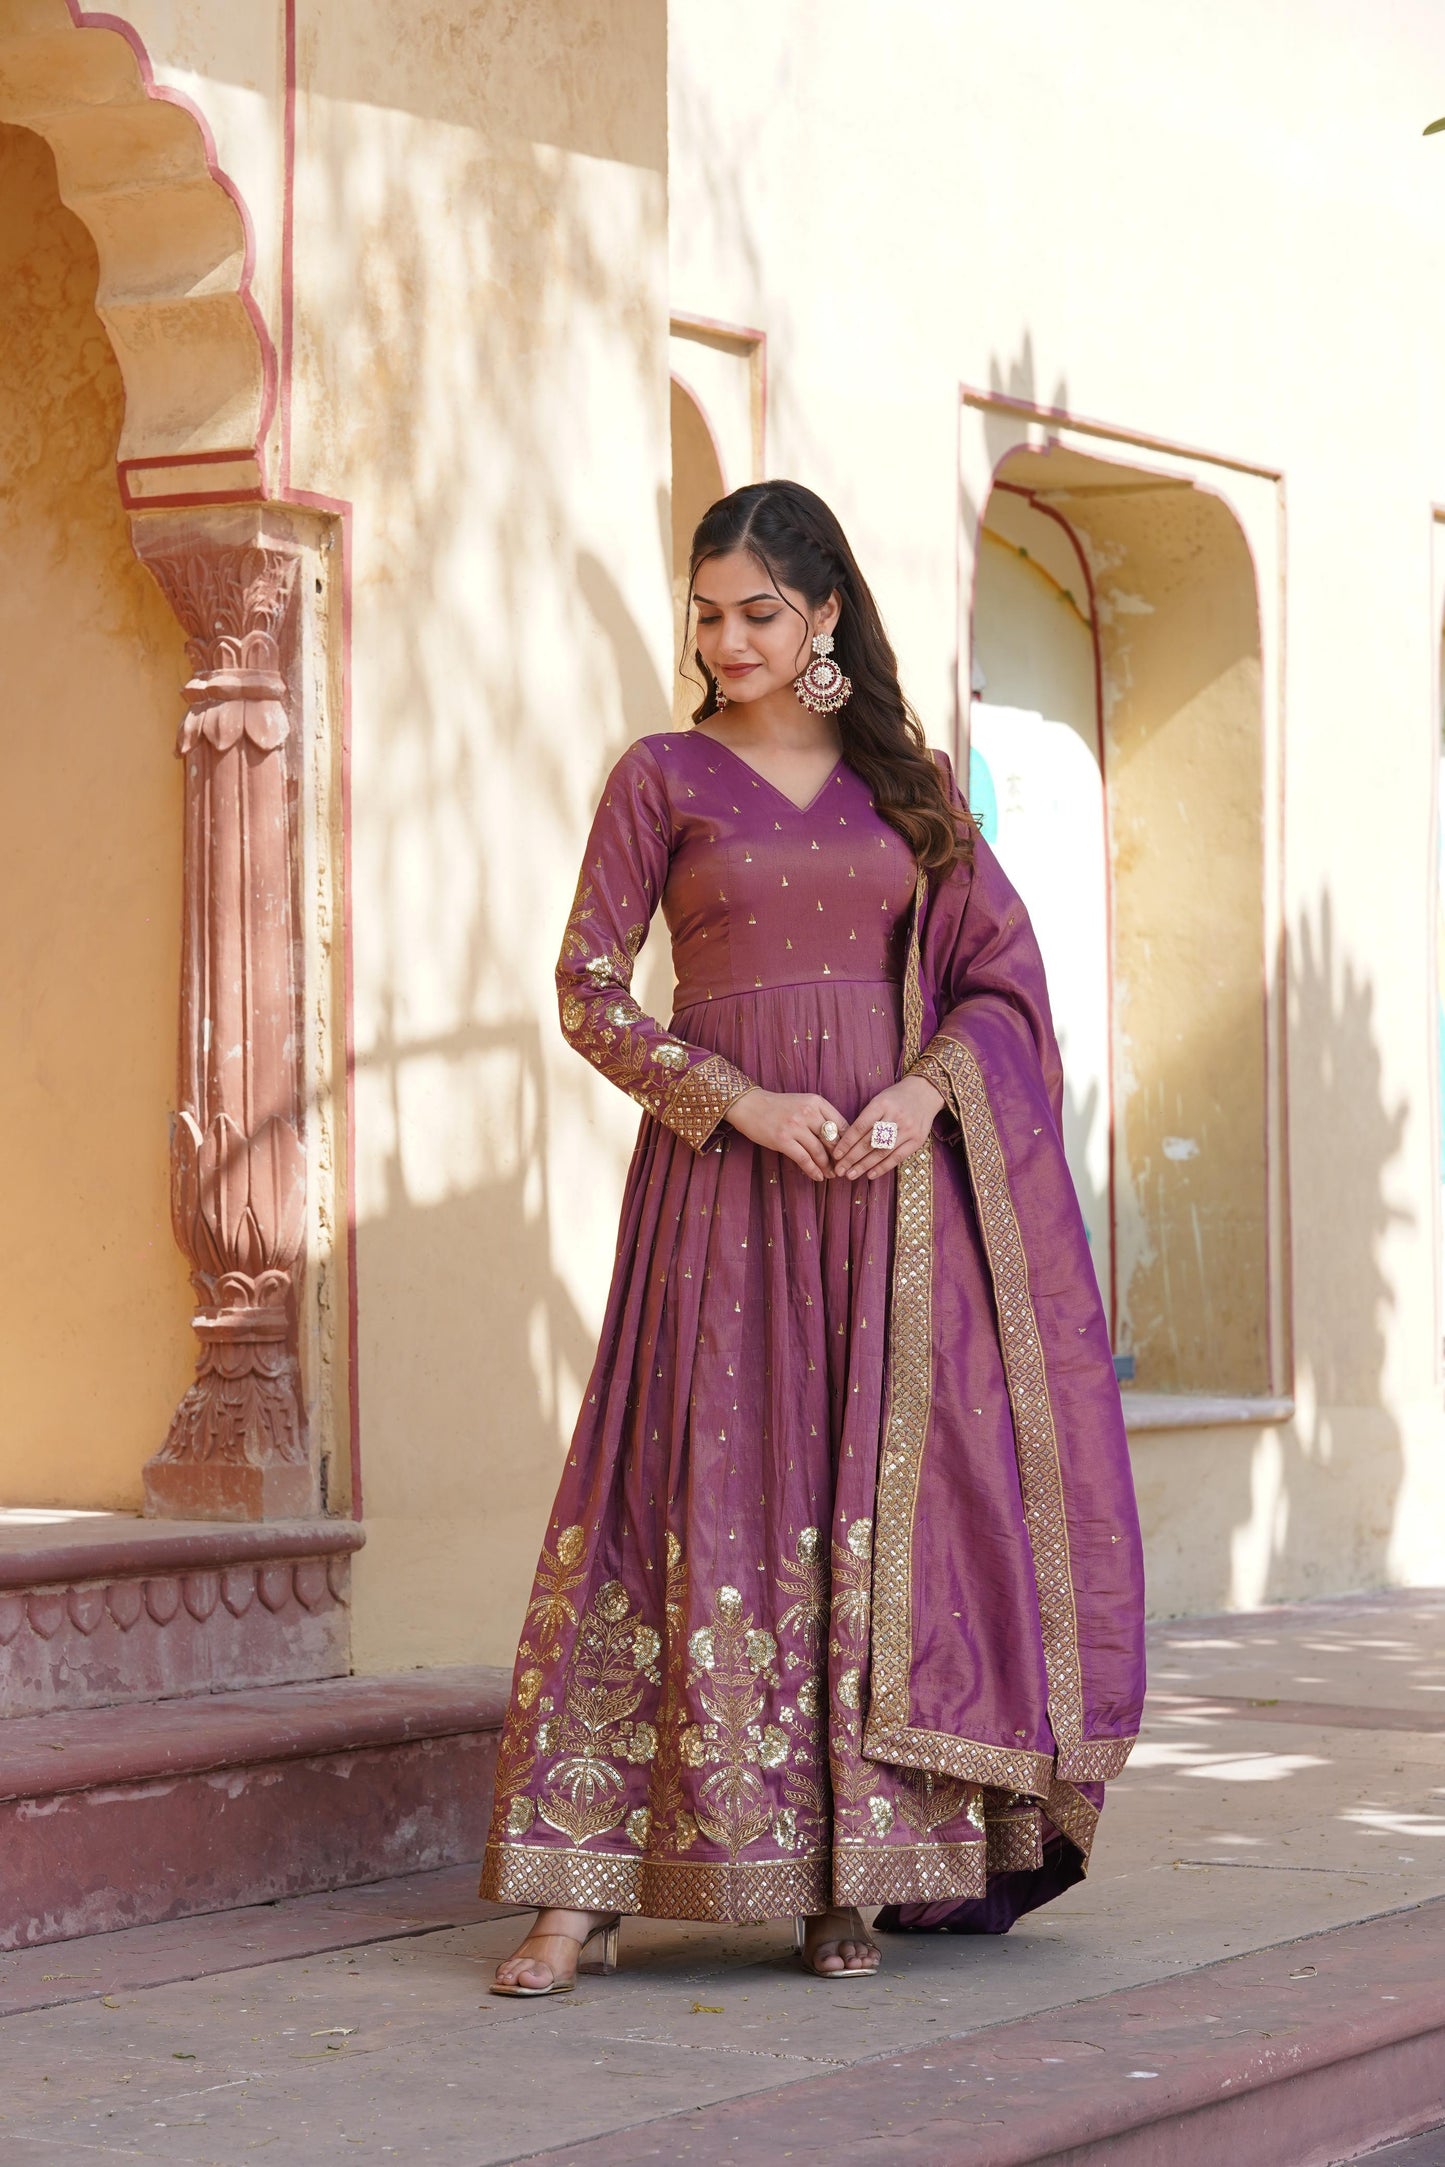 Dusty Pink Celestial Cosmos Embroidered Viscose Ensemble - Inayakhan Shop 